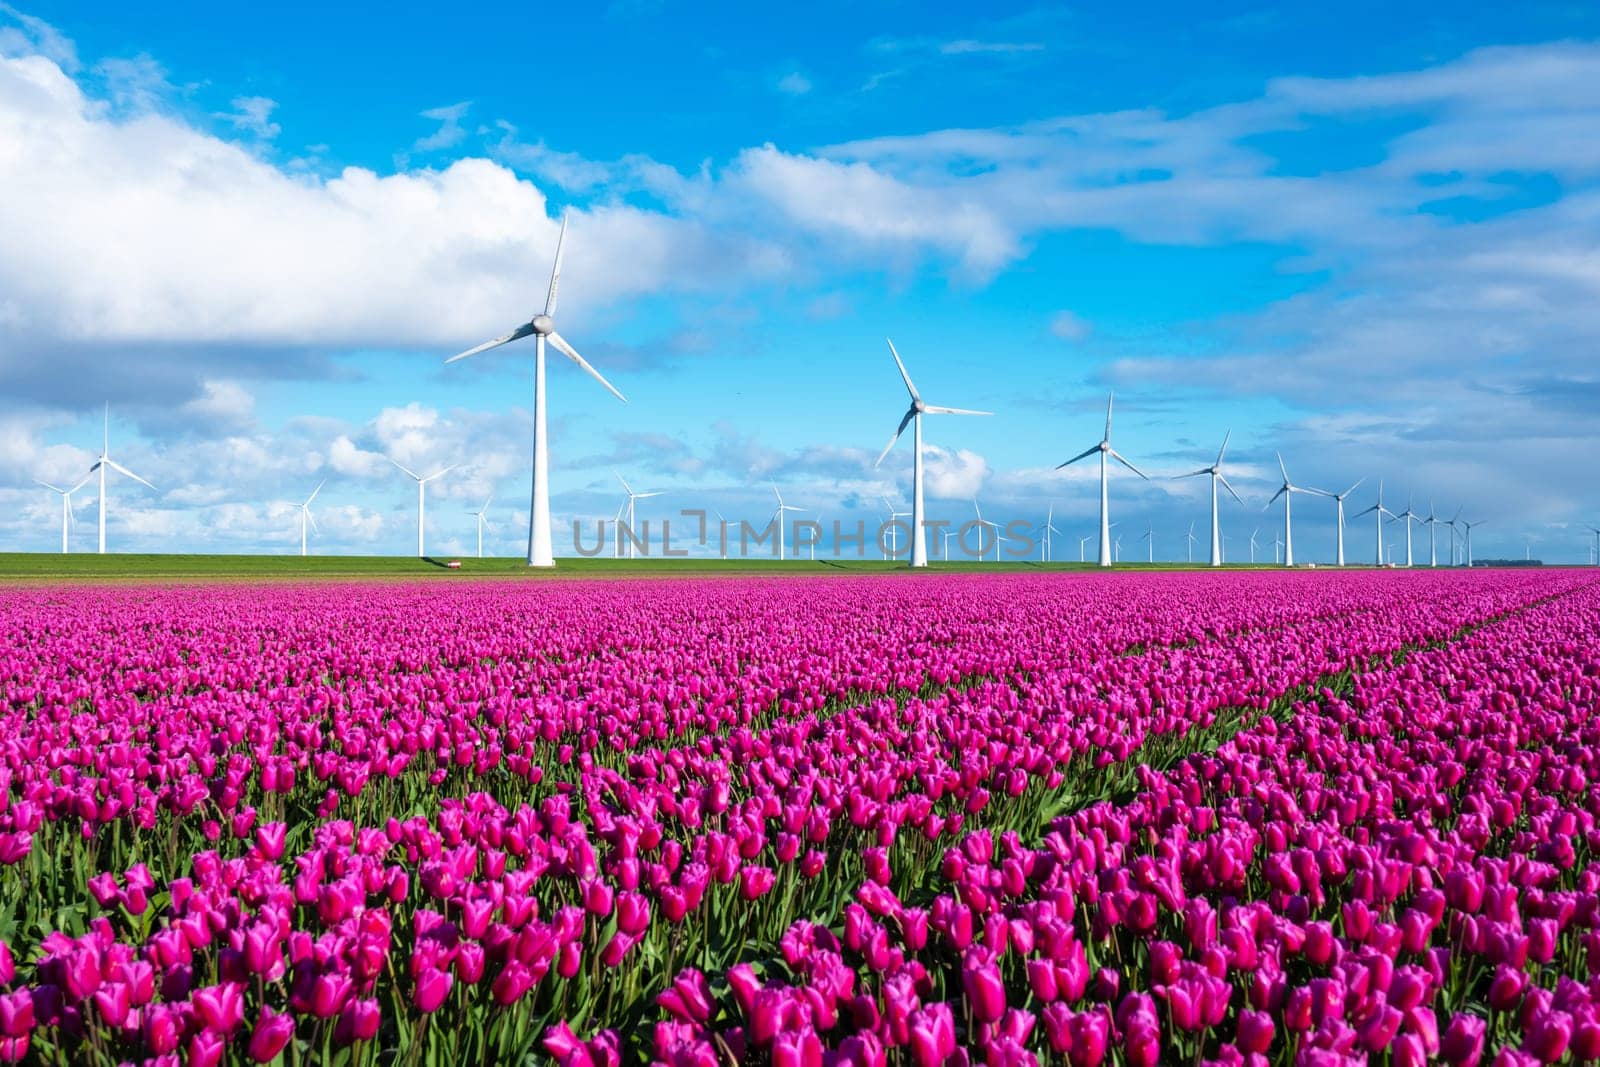 A picturesque scene of vibrant purple tulips swaying in the wind, with towering windmills in the peaceful Dutch countryside by fokkebok